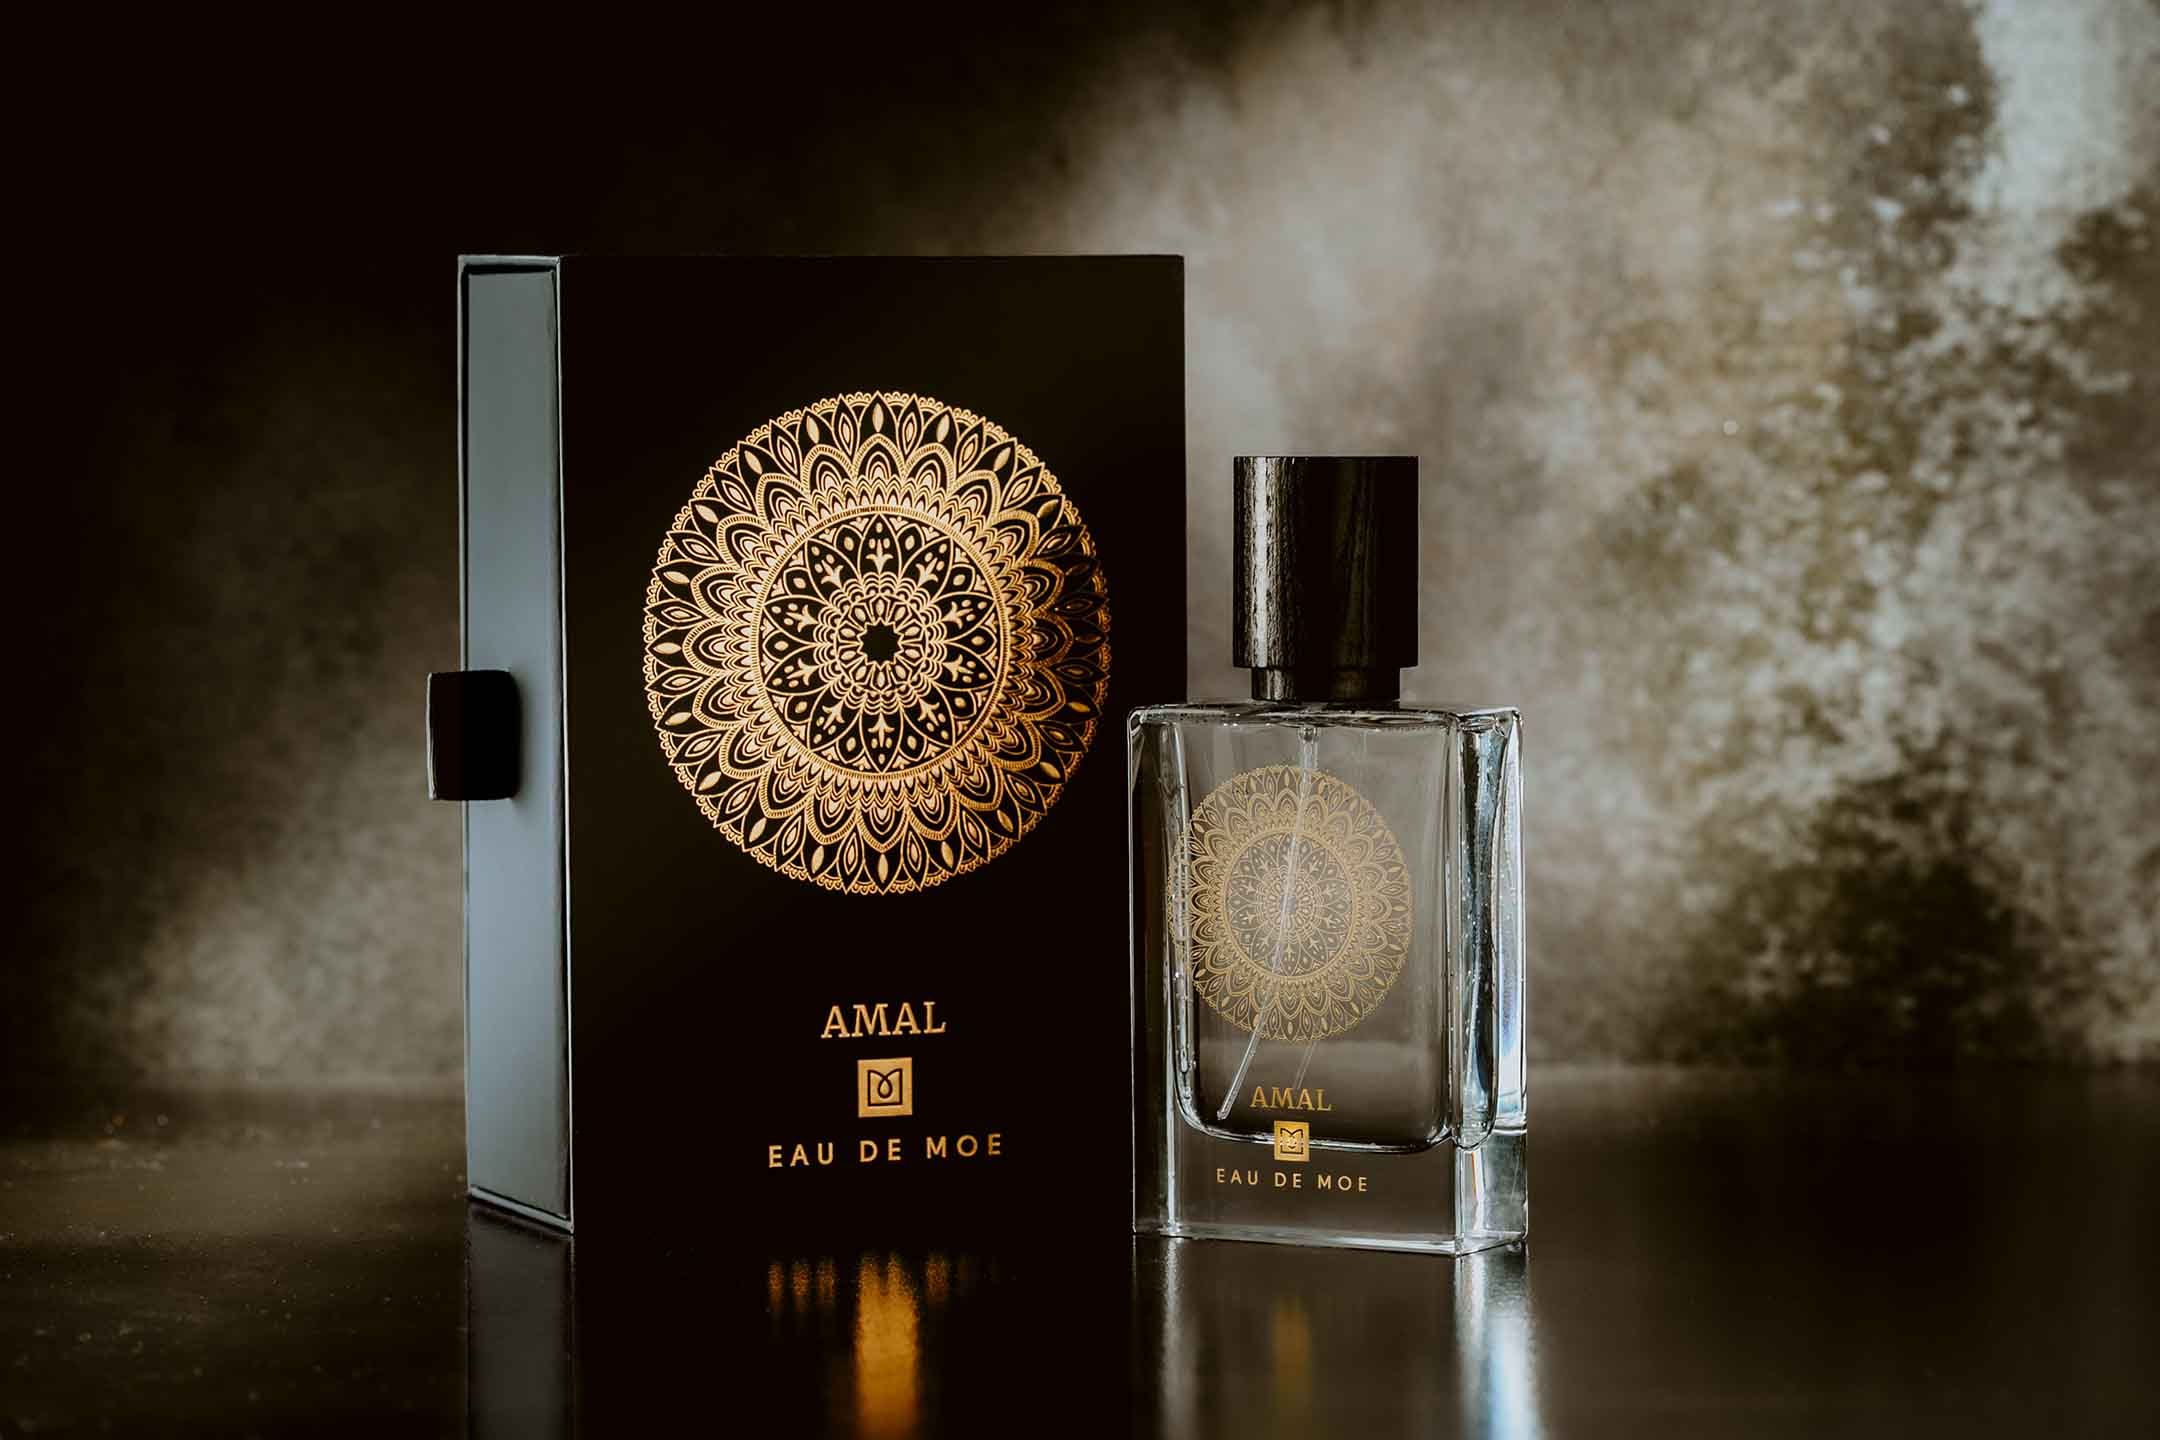 Image of bottle and box of AMAL EDP on a dark background with highlights